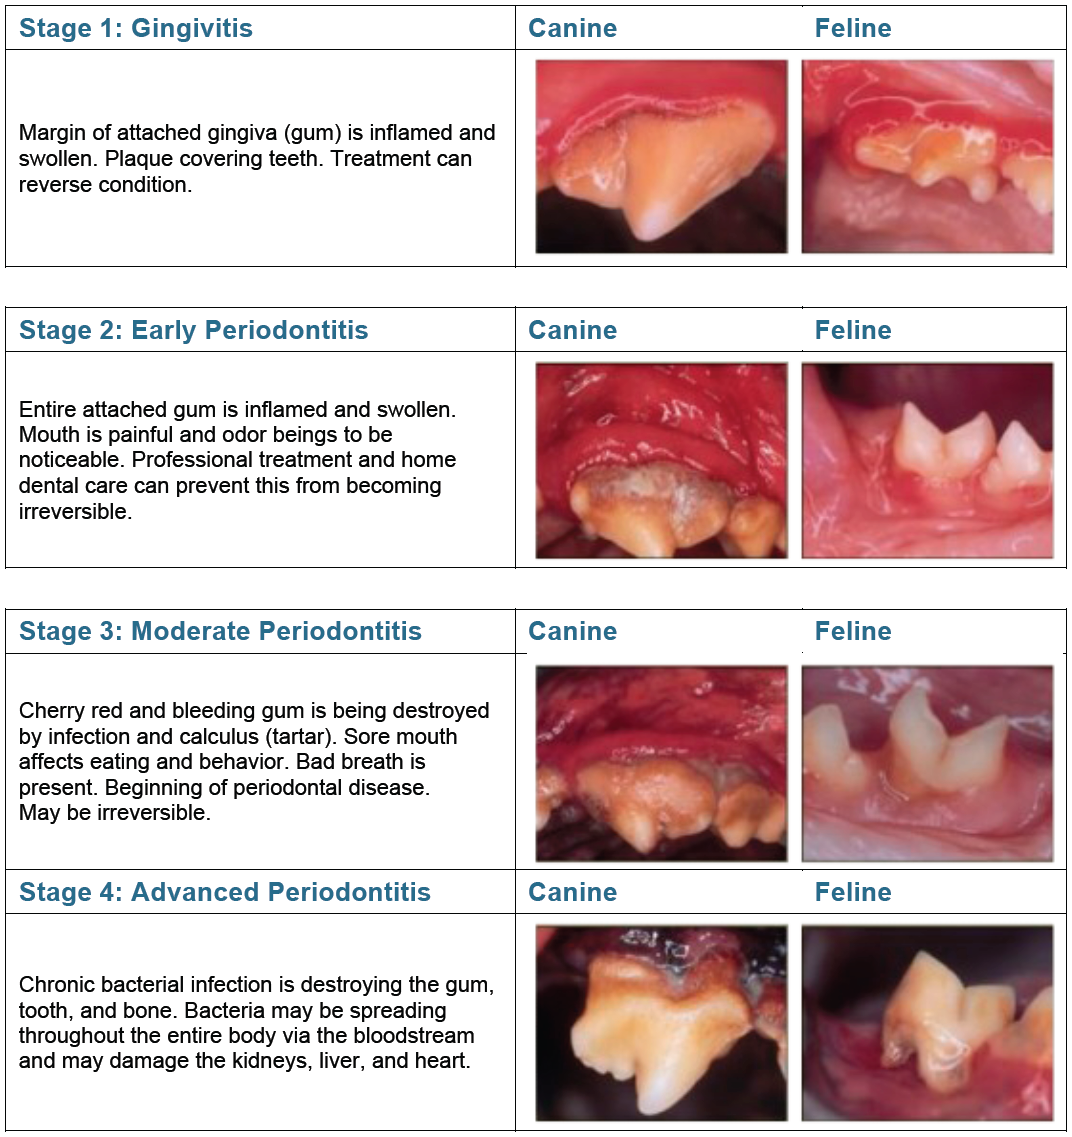 Stages of Periodontal Disease in Dogs and Cats